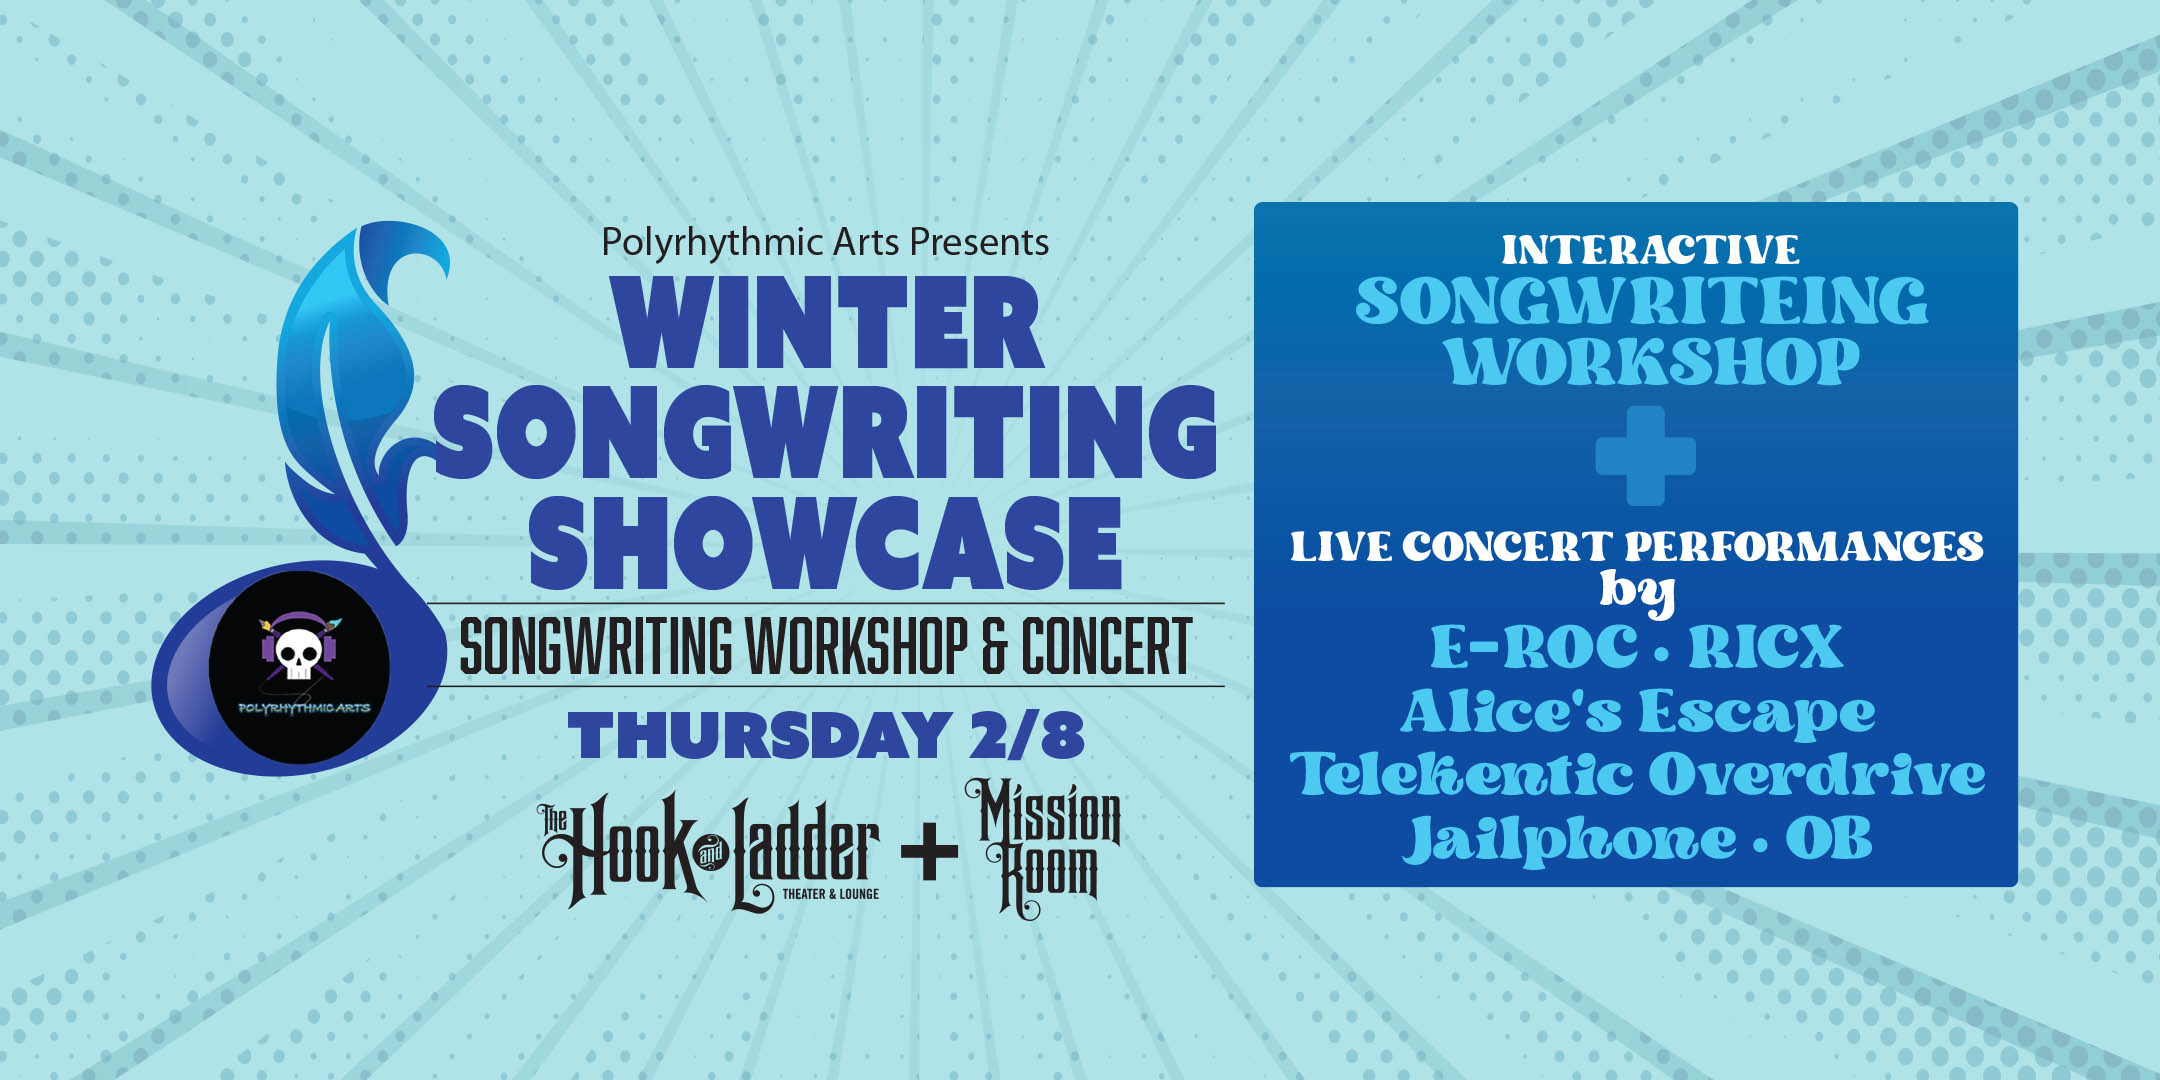 Winter Songwriting Showcase Songwriting Workshop & Concert Live Performances by E-ROC, RICX, Alice's Escape, Telekentic Overdrive, Jailphone, OB Thursday, February 8 Mission Room at The Hook and Ladder Doors 6:00 :: Workshop 6:15pm :: Performances 8pm $15 ADV/ $20 DOS